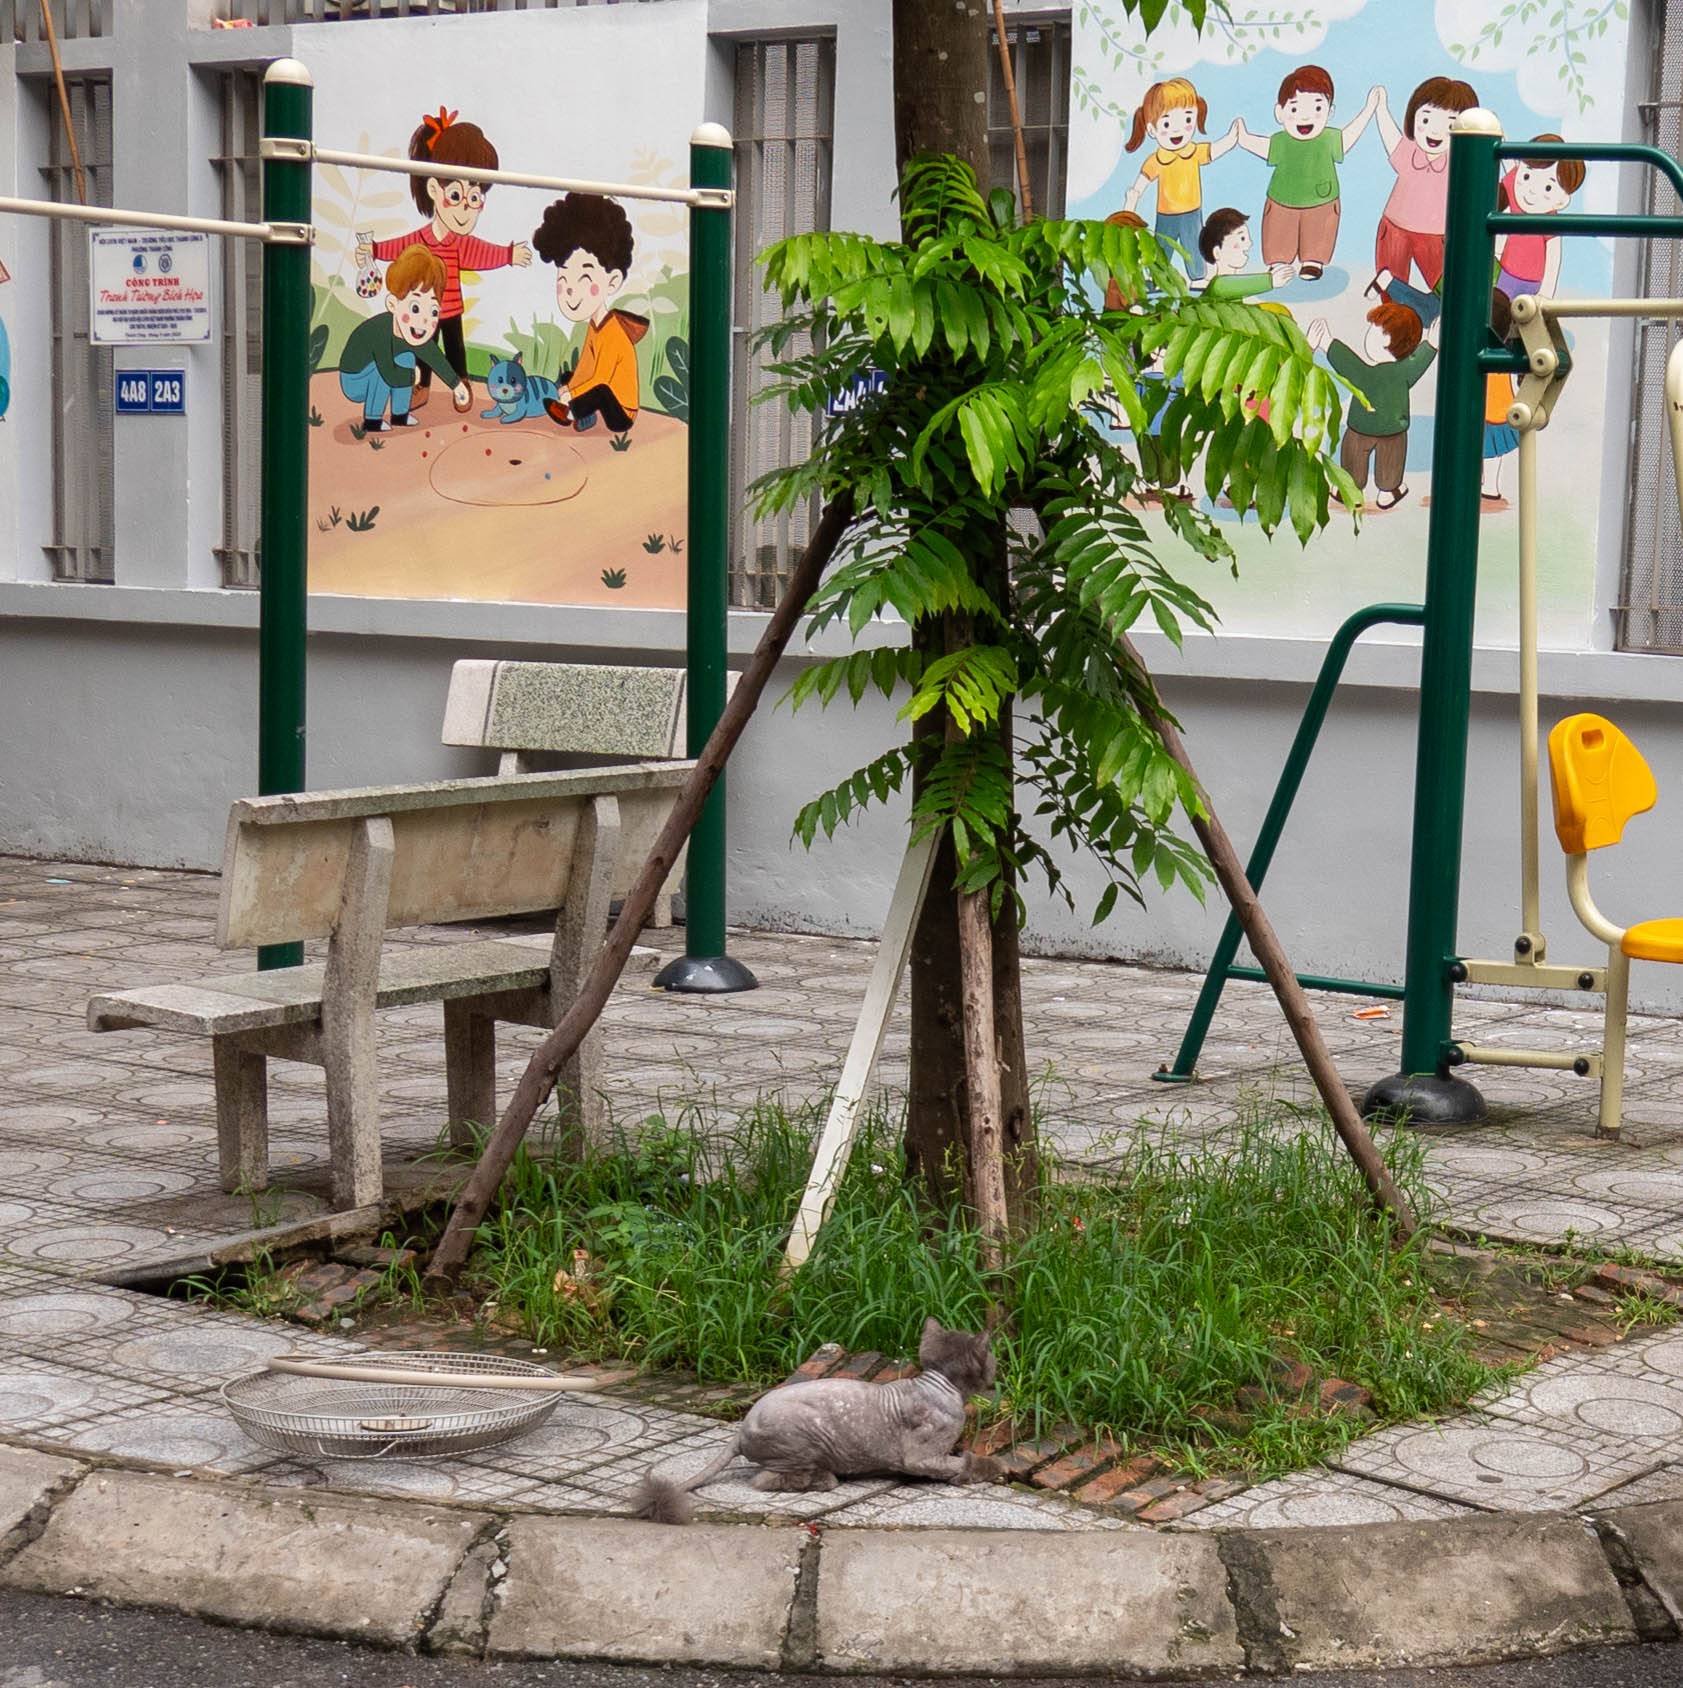 This picture shows wall murals of small children playing and a small tree in between them with green leaves. YOu can see a chin-up bar to the left of the tree cutting across the mural of three children playing a game. to the right of the tree in front of the other mural is part of a swing set. in the foreground is a shaved gray persion cat that has been shaved to look like a lion and it is stalking a bird inthe grass at the base of the tree. The bird is very hard to see and you can only really see the organge beak. There is a stone bench facing away from the tree that is located to the left of the tree under the mural of the children playing marbles.